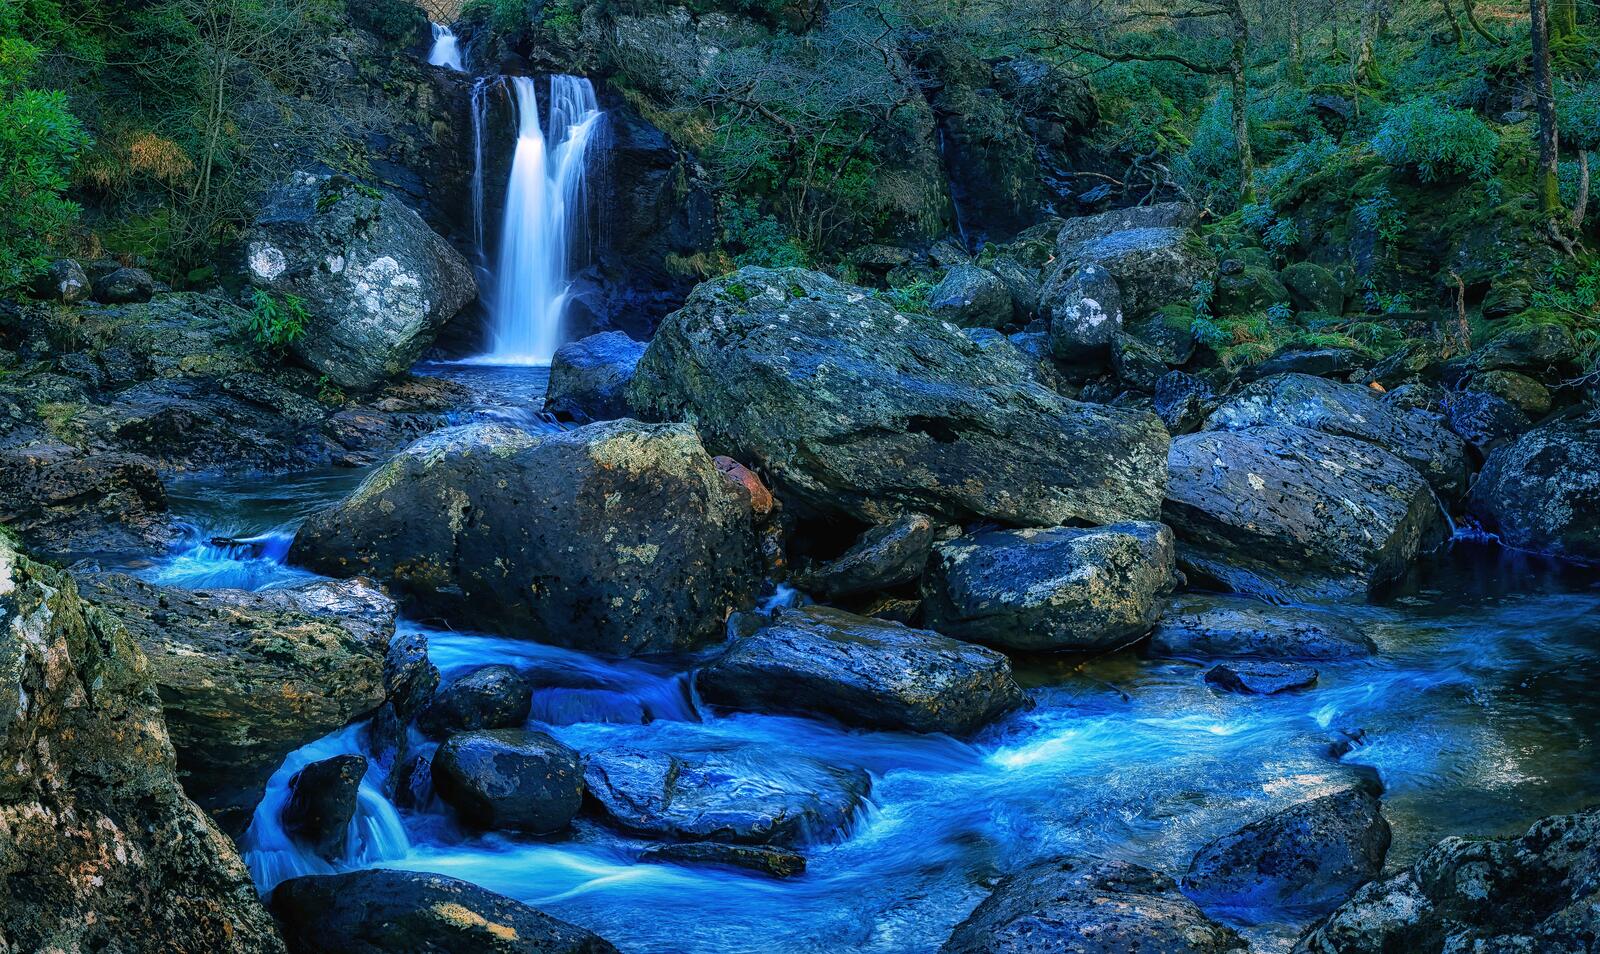 Wallpapers Loch Lomond and Trossachs National Park Scotland Waterfall on the desktop